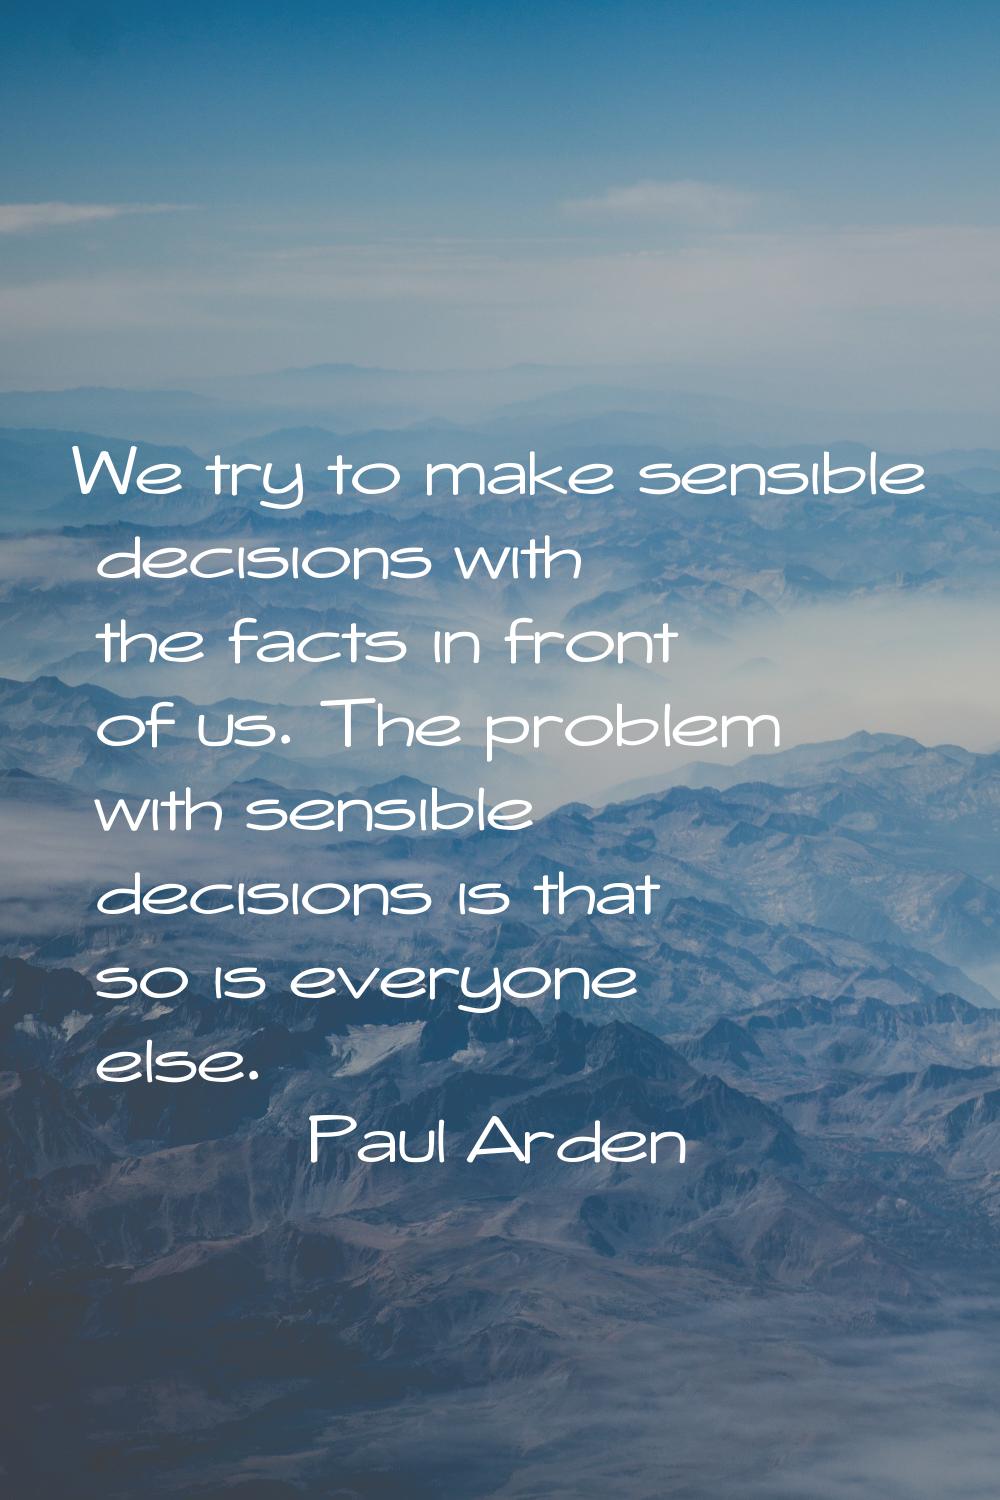 We try to make sensible decisions with the facts in front of us. The problem with sensible decision